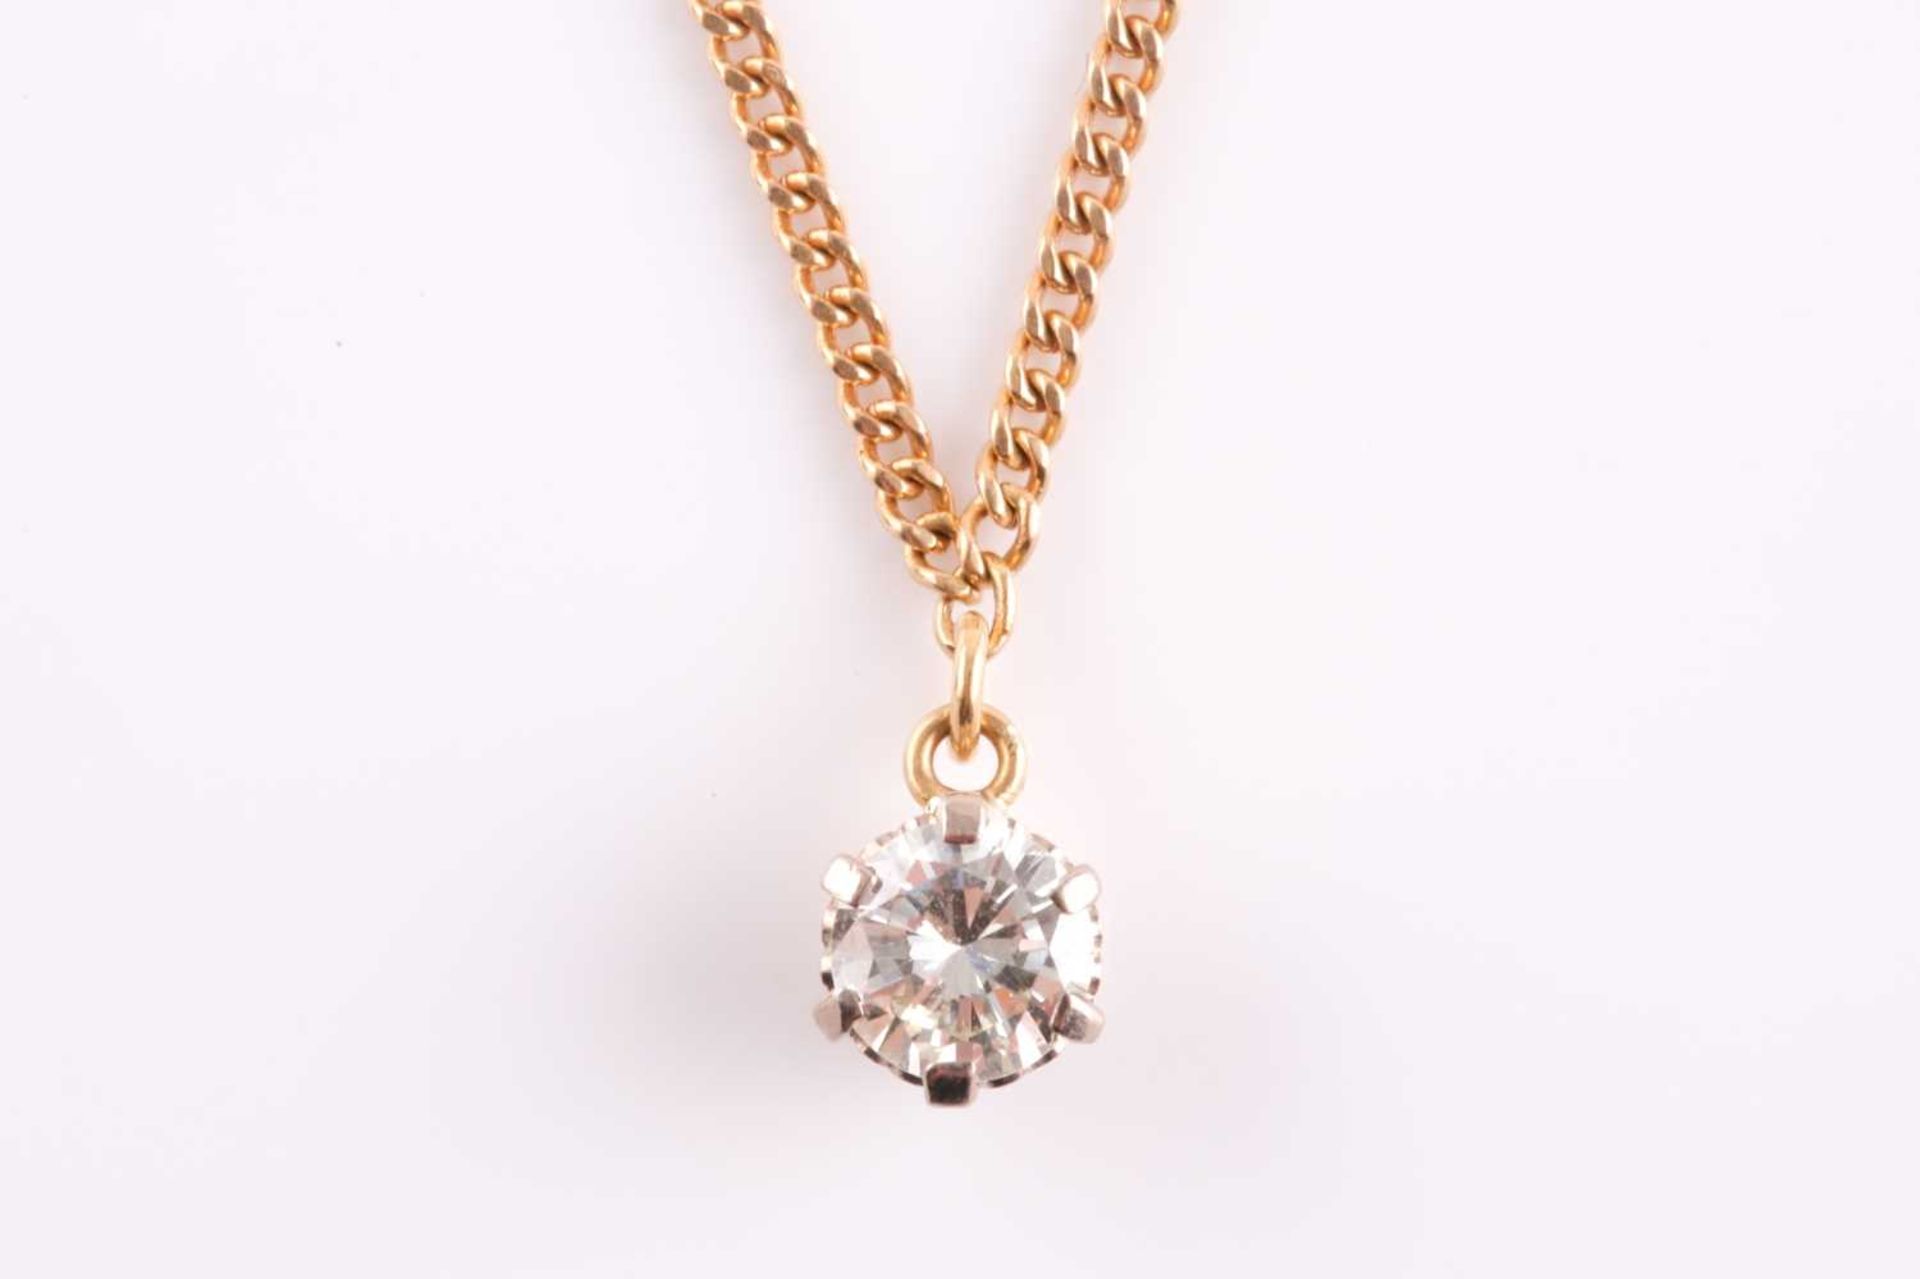 An 18ct yellow gold and solitiare diamond pendant necklace, set with a round brilliant-cut diamond